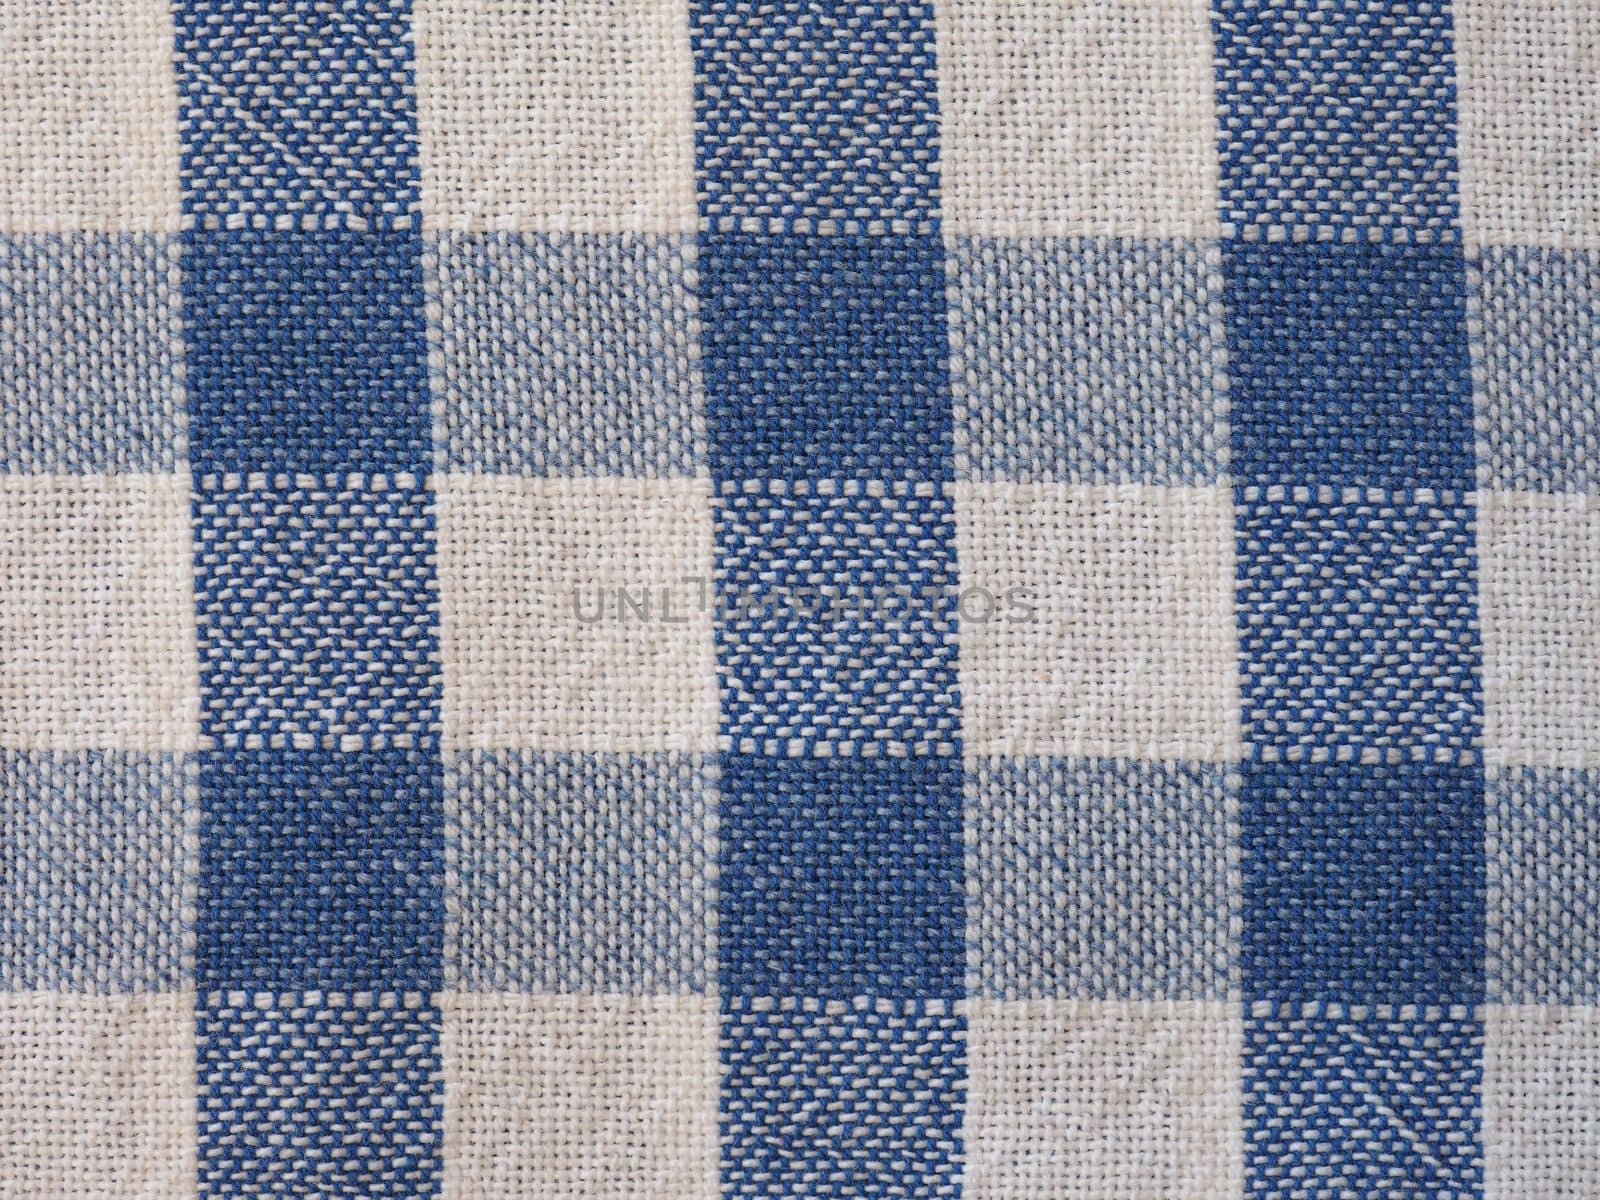 blue and white checkered fabric useful as a background